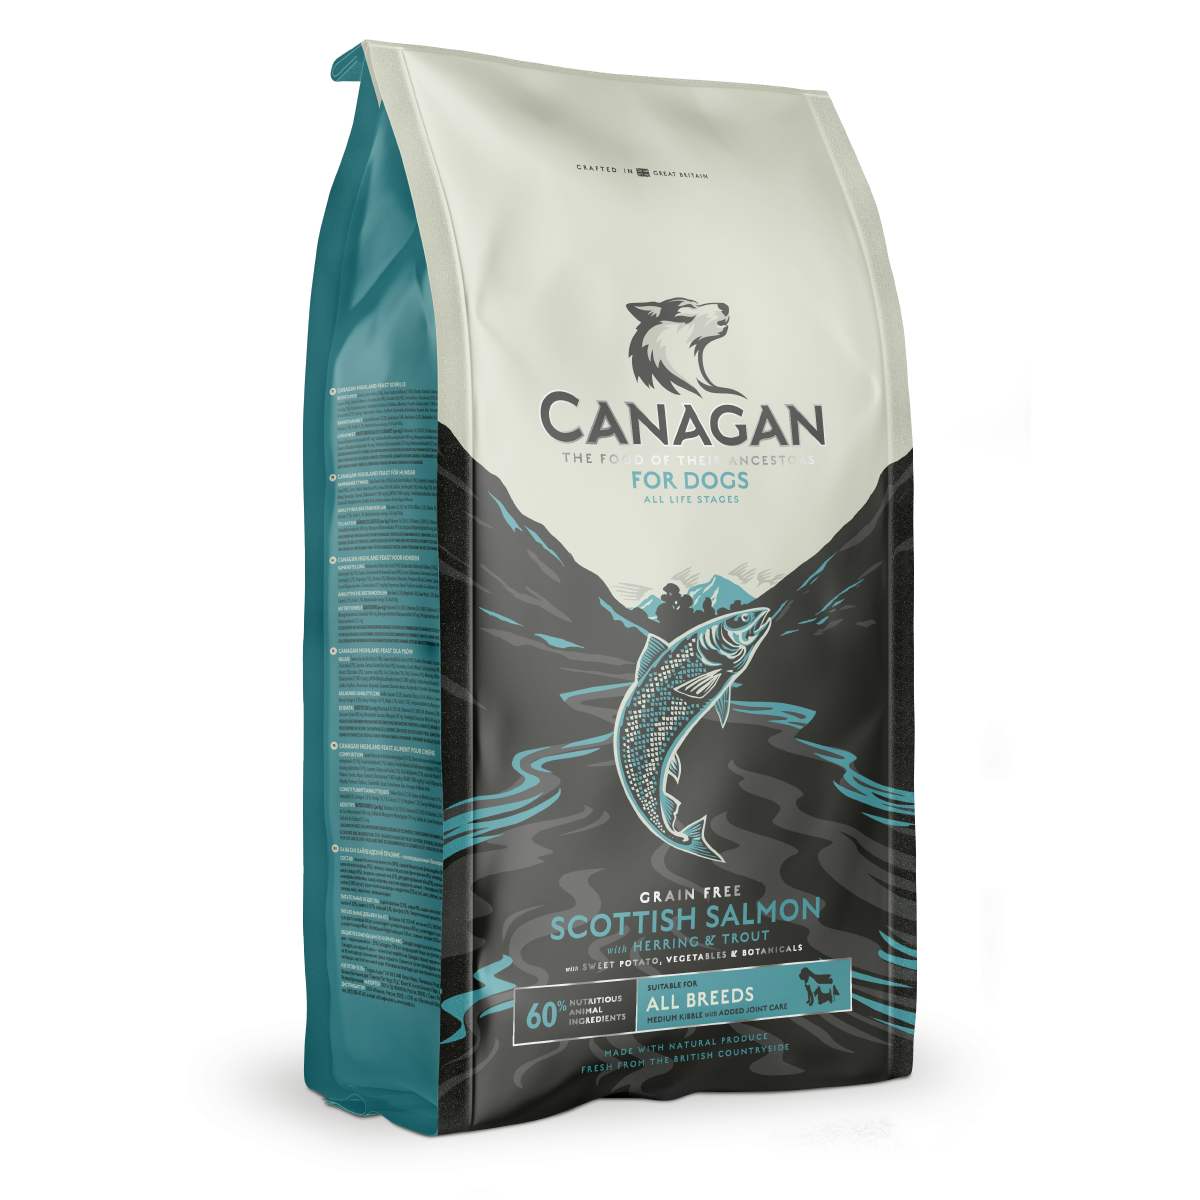 Canagan Scottish Salmon For Dogs